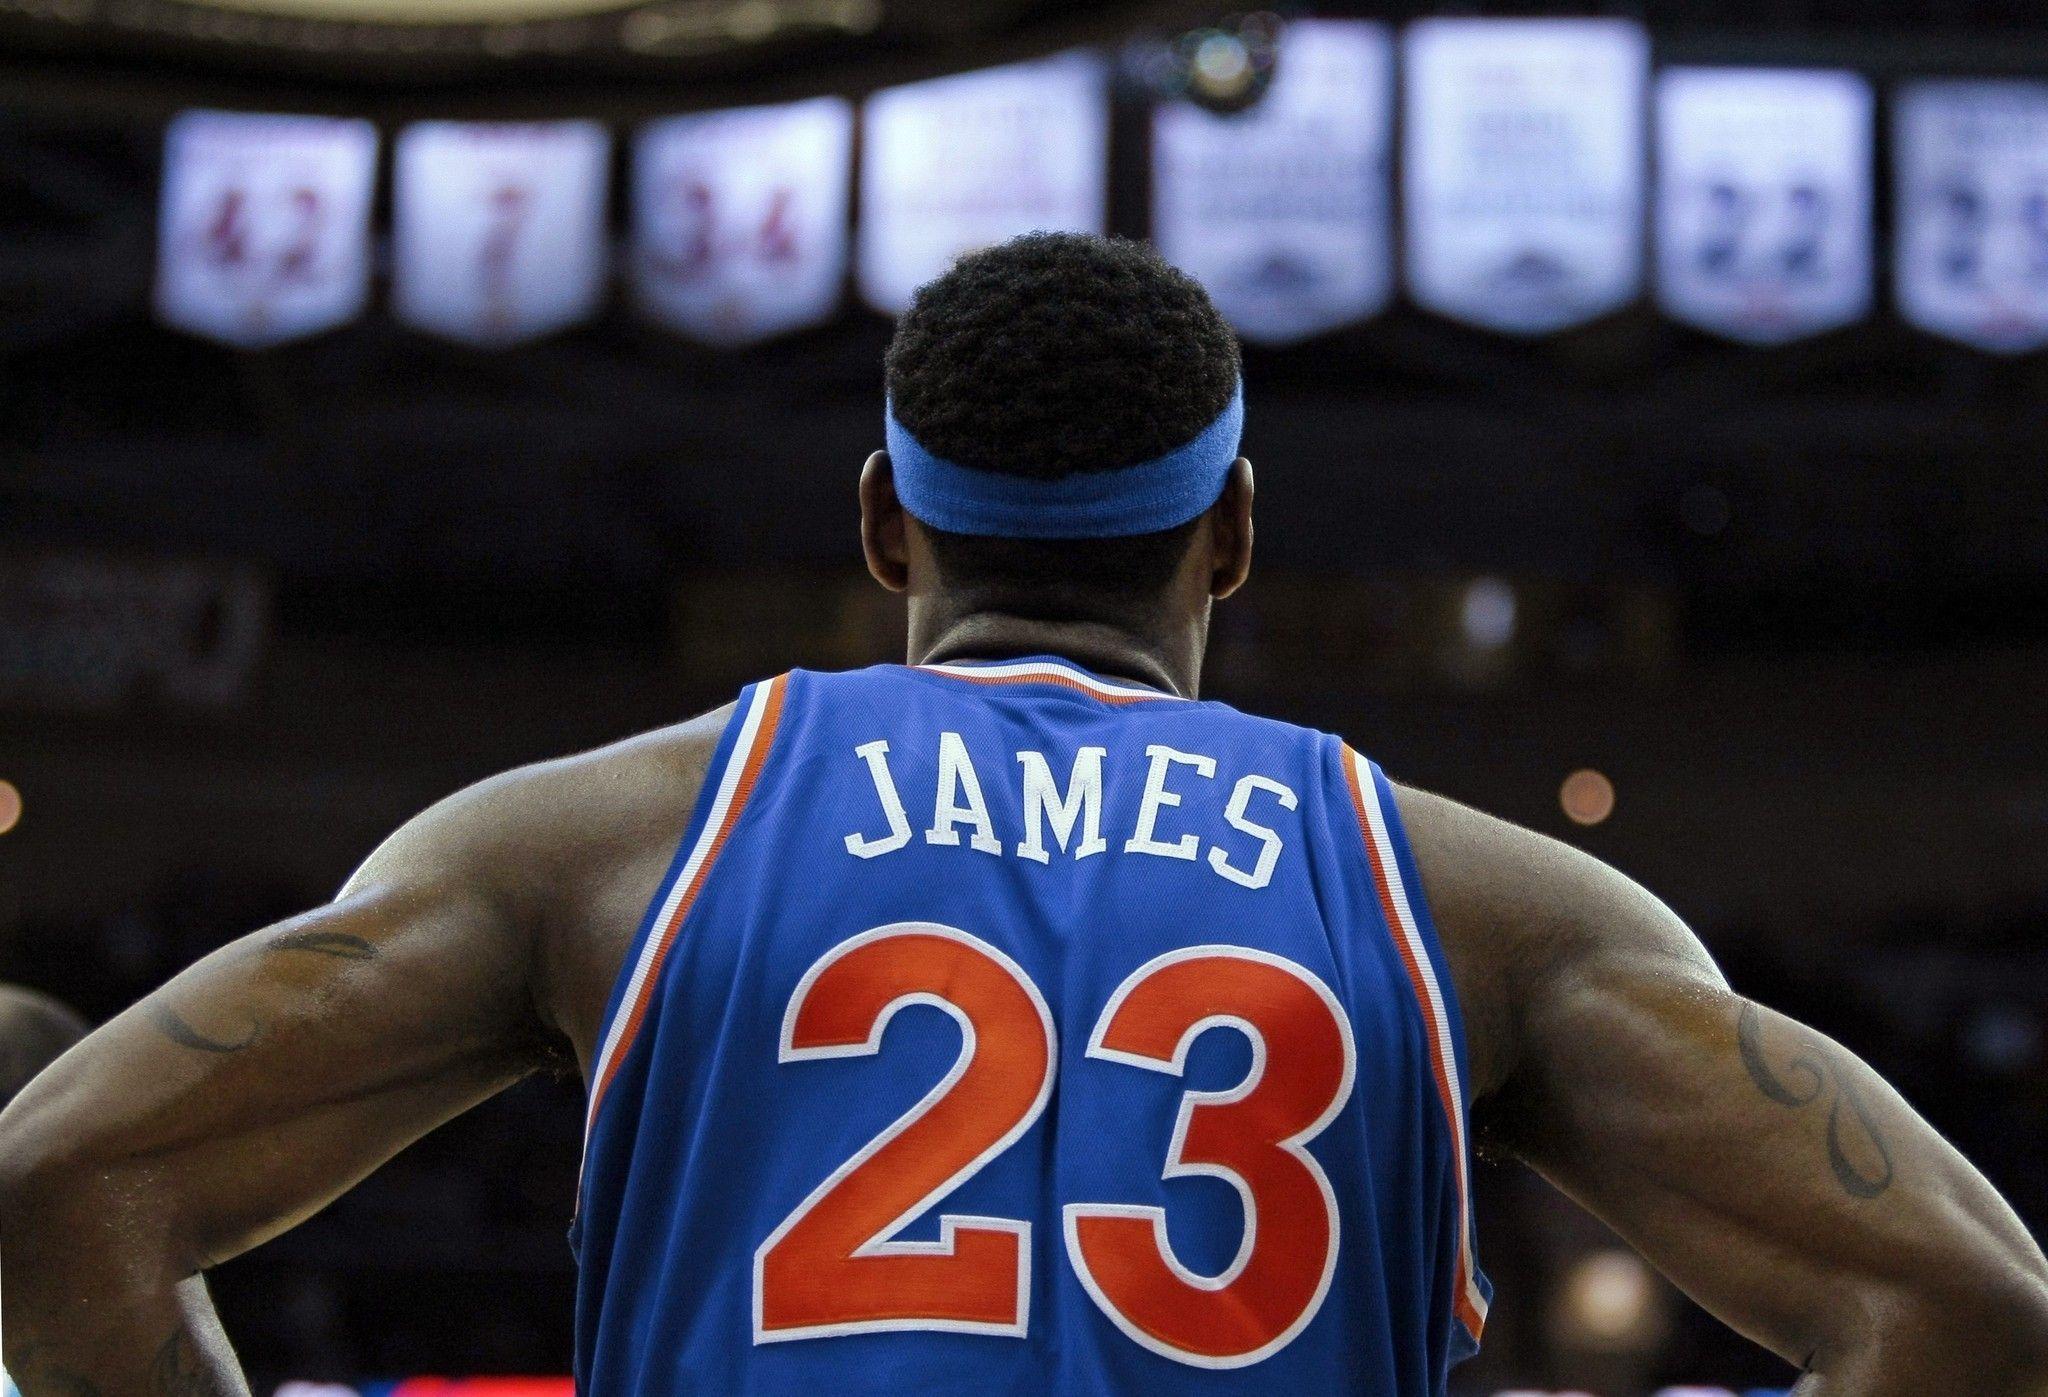 LeBron James says he'll switch back to No. 23 with Cleveland